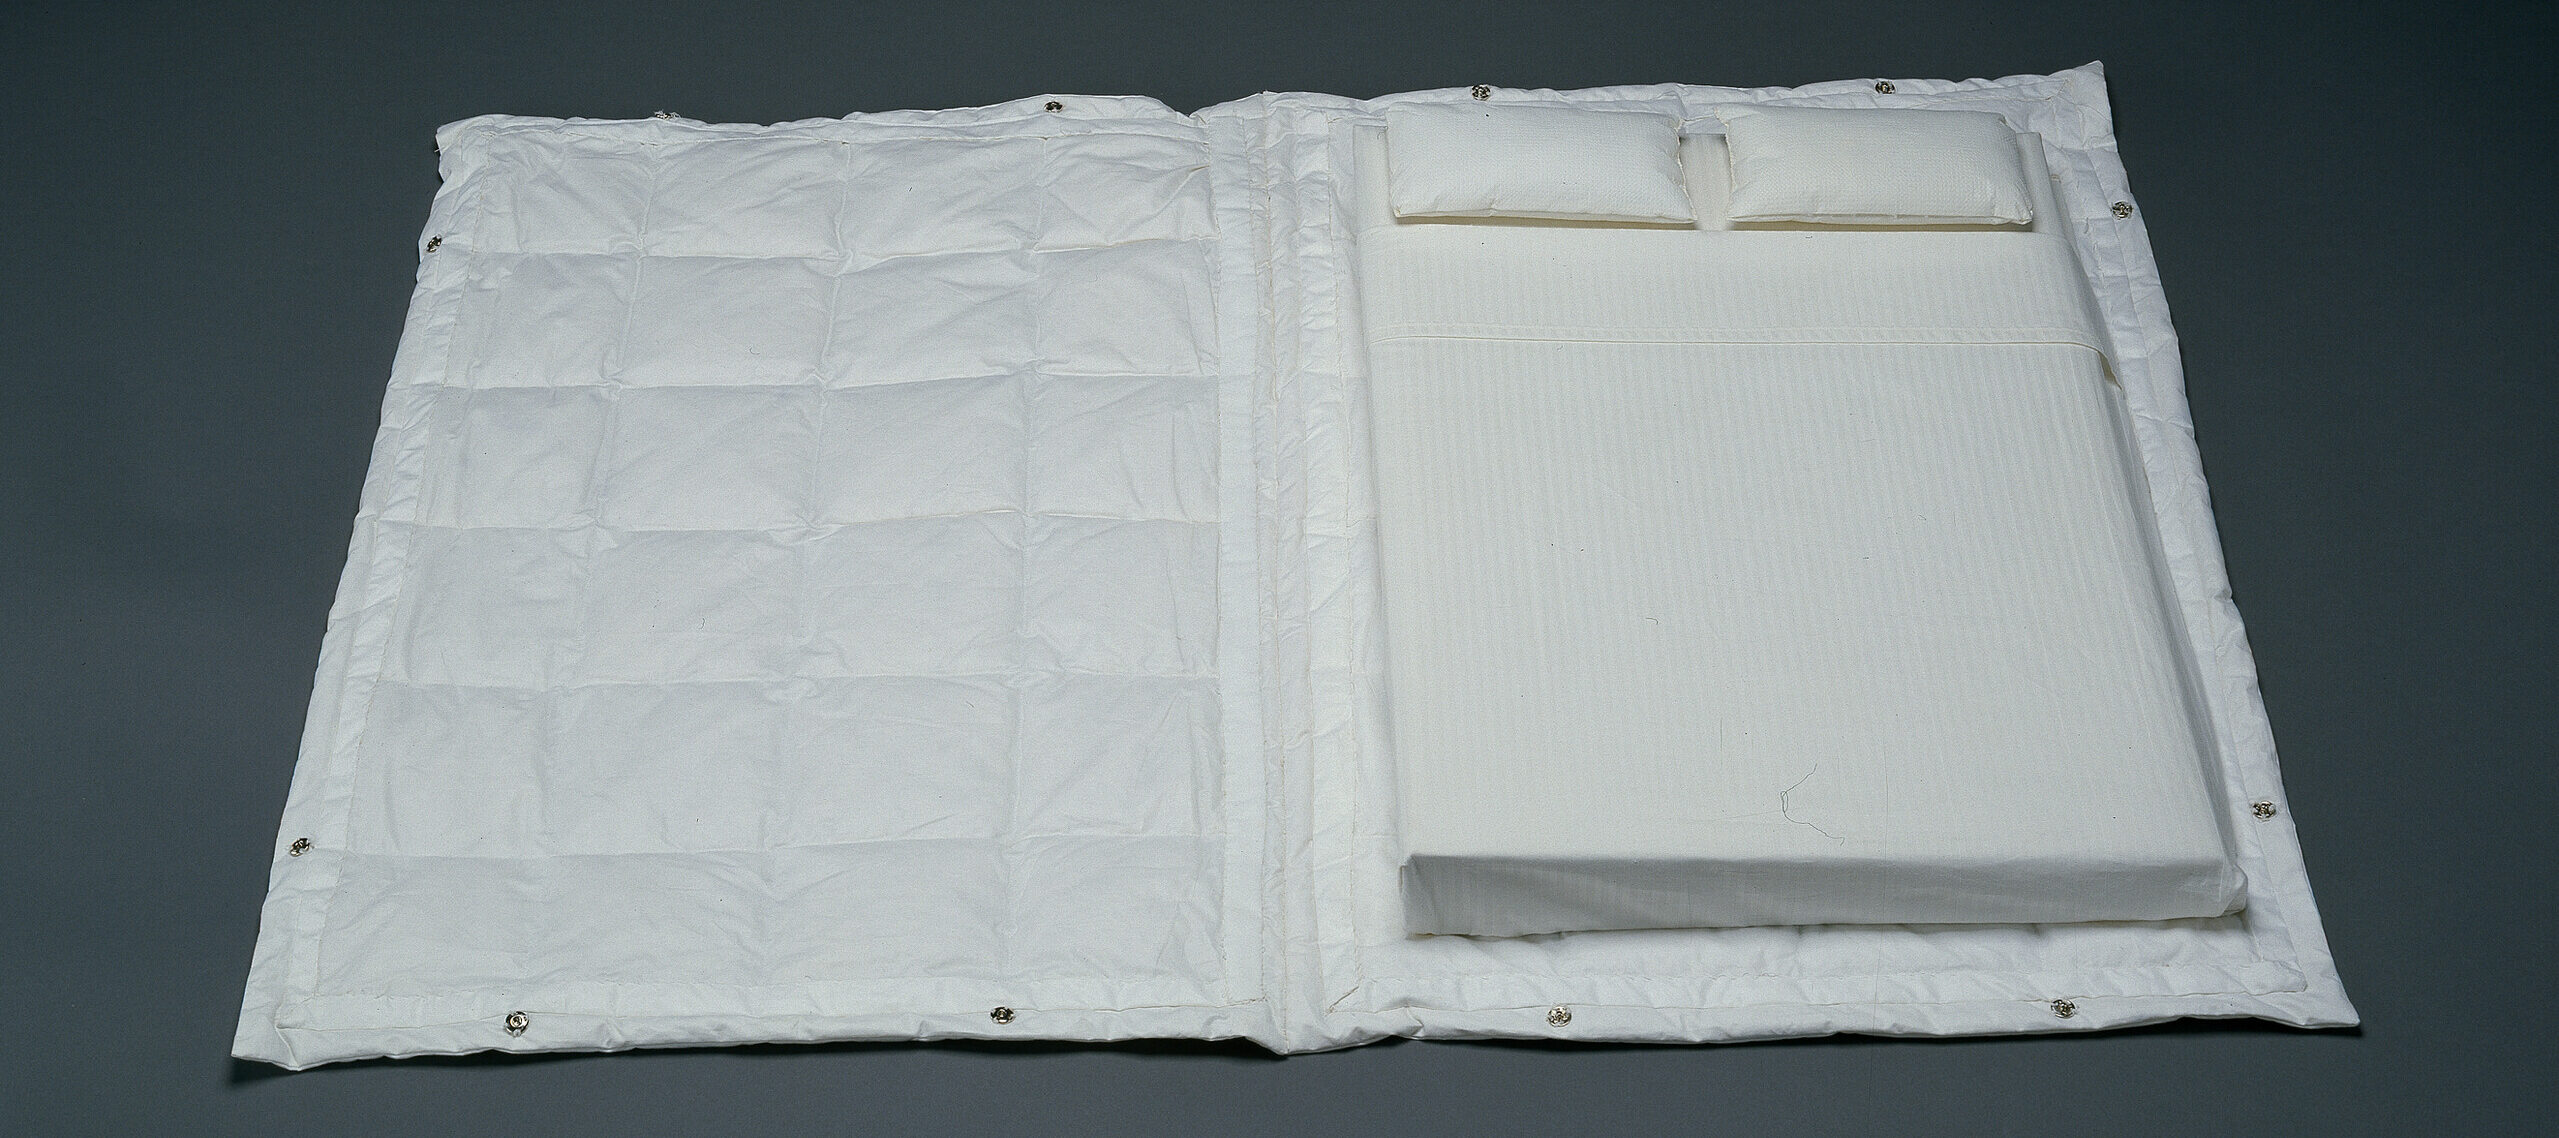 A open book with a cover made out of a white comforter and pages in the shape of a mattress covered in white sheets with two white pillows at the top.